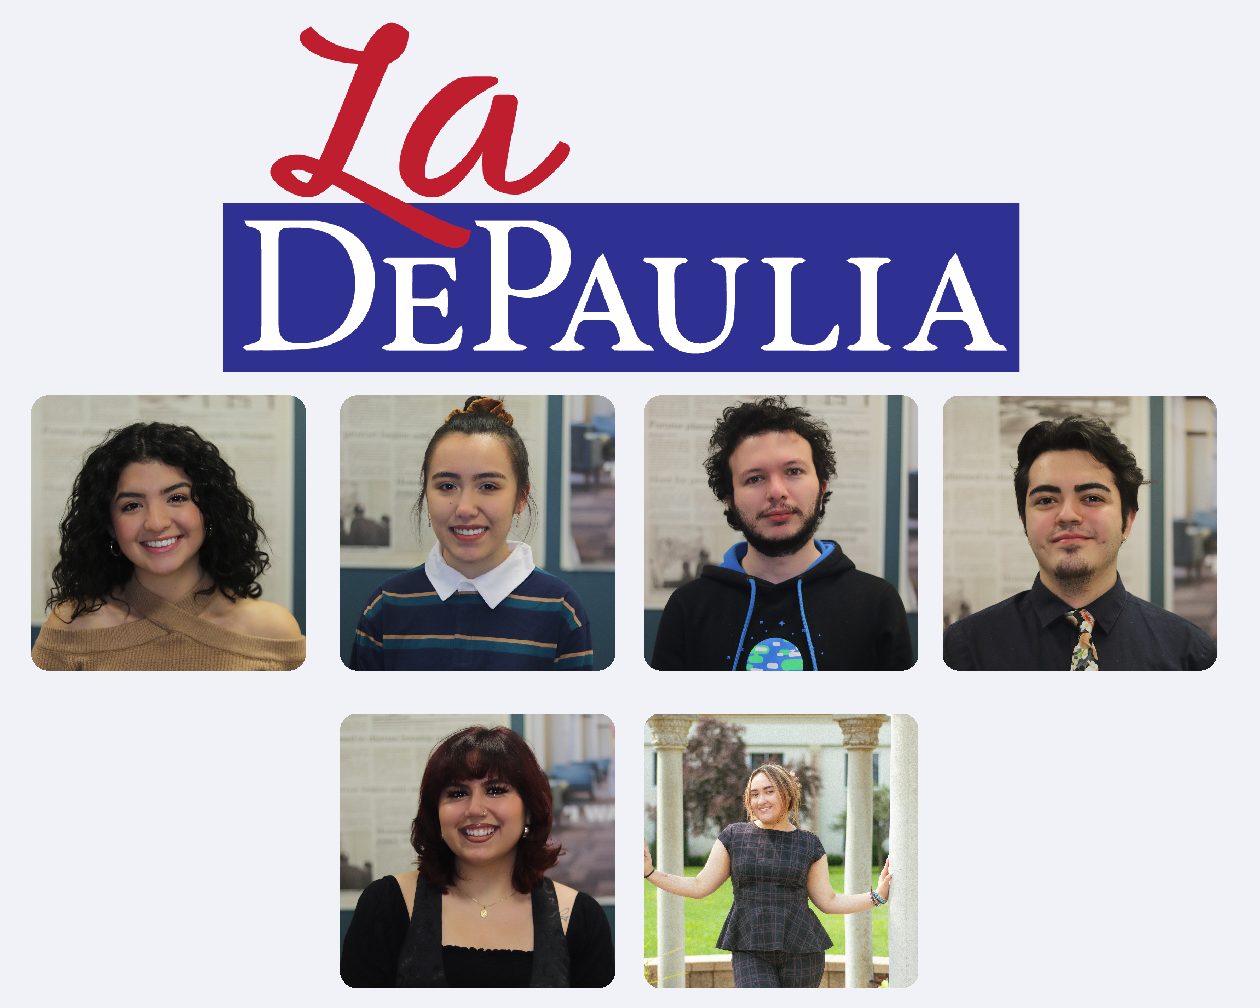 Letter from the editors: Two years of La DePaulia